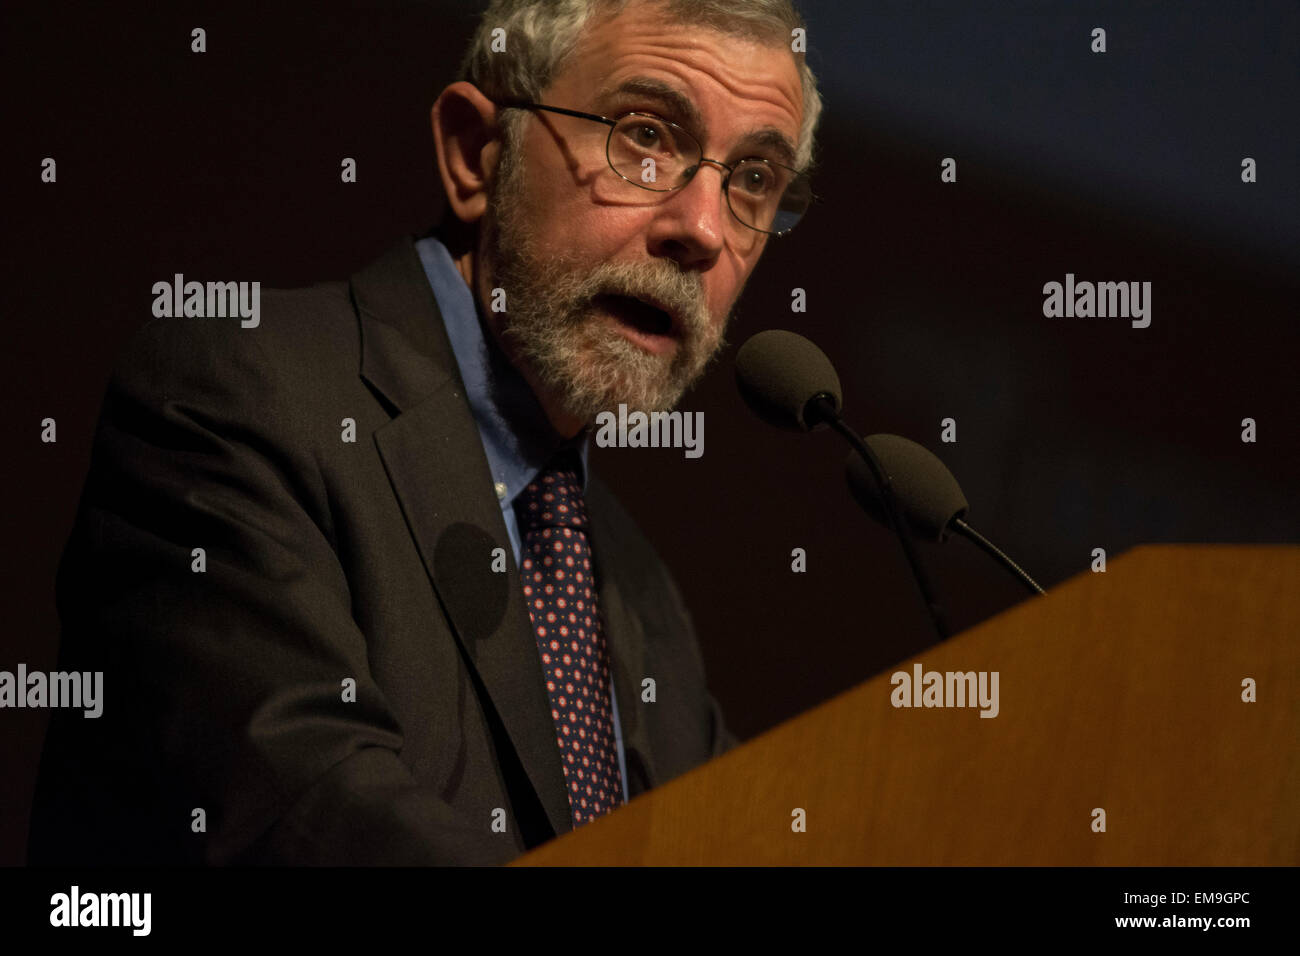 Athens, Greece, 17 April 2015. Paul Krugman, Professor of Economics and Nobelist, speaks on the European economic crisis at the Megaron Athens Concert Hall. His speech titled, “Europe, what’s next?” was organized by the Athens Development and Governance Institute, ADGI–INERPOST, a non-partisan NGO focusing on governance and development issues. Credit:  Nikolas Georgiou/Alamy Live News Stock Photo